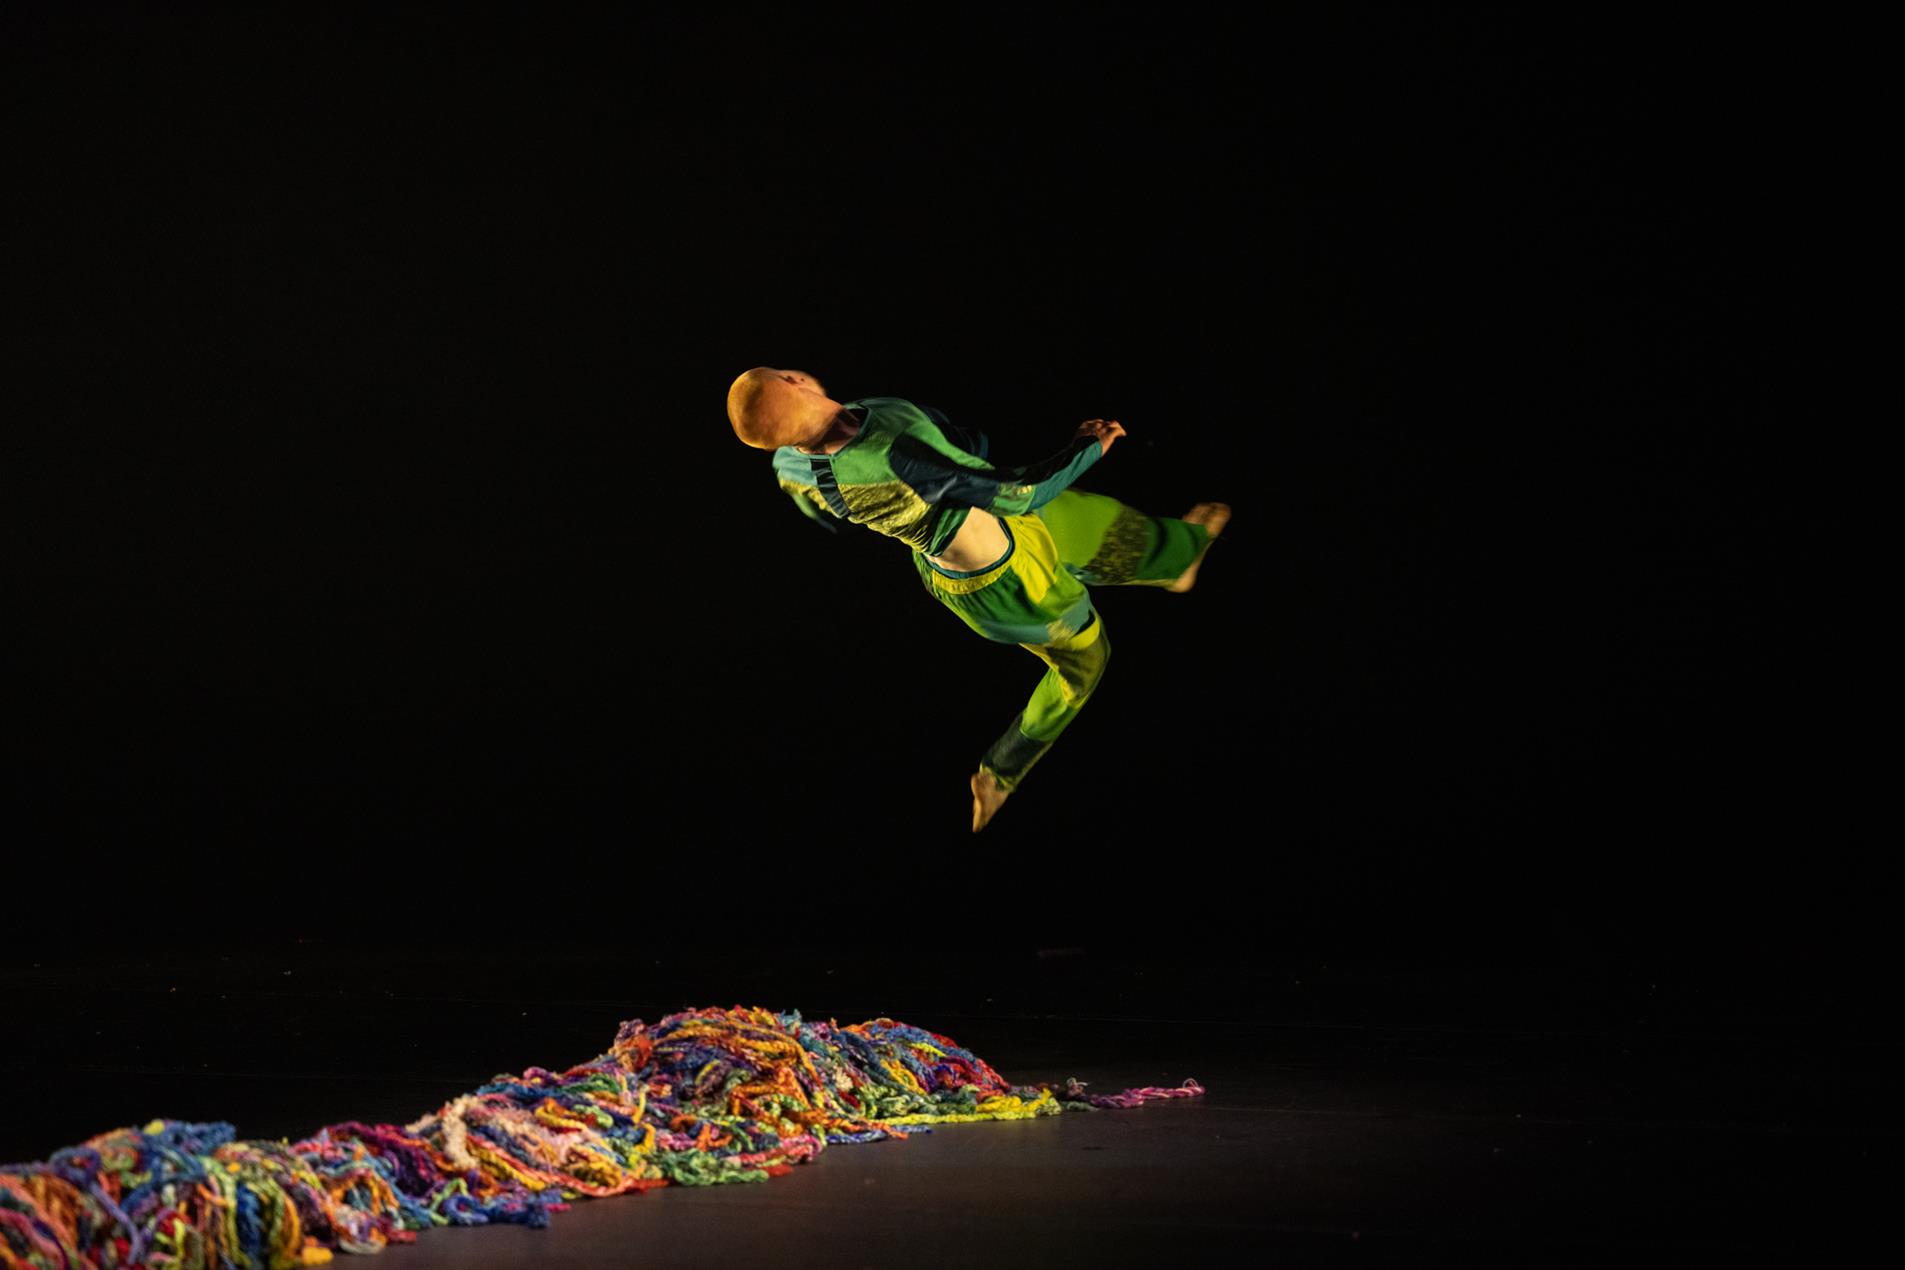 A male dancer performing on stage with colourful wool on the ground.